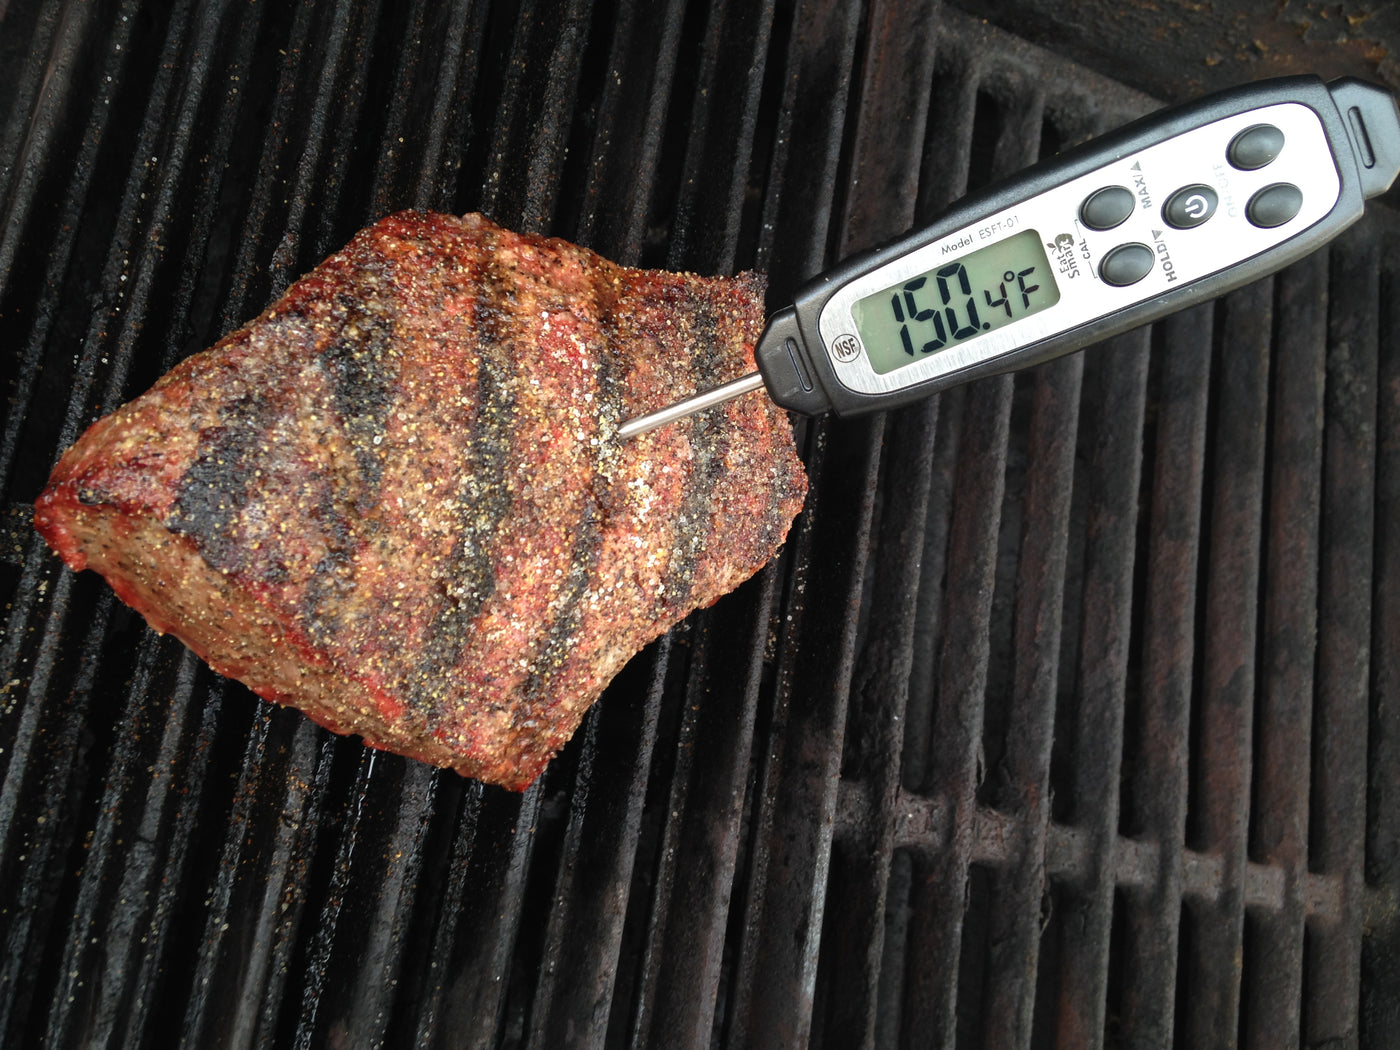 A Food Thermometer is Key to Food Safety - Eat Smart, Move More